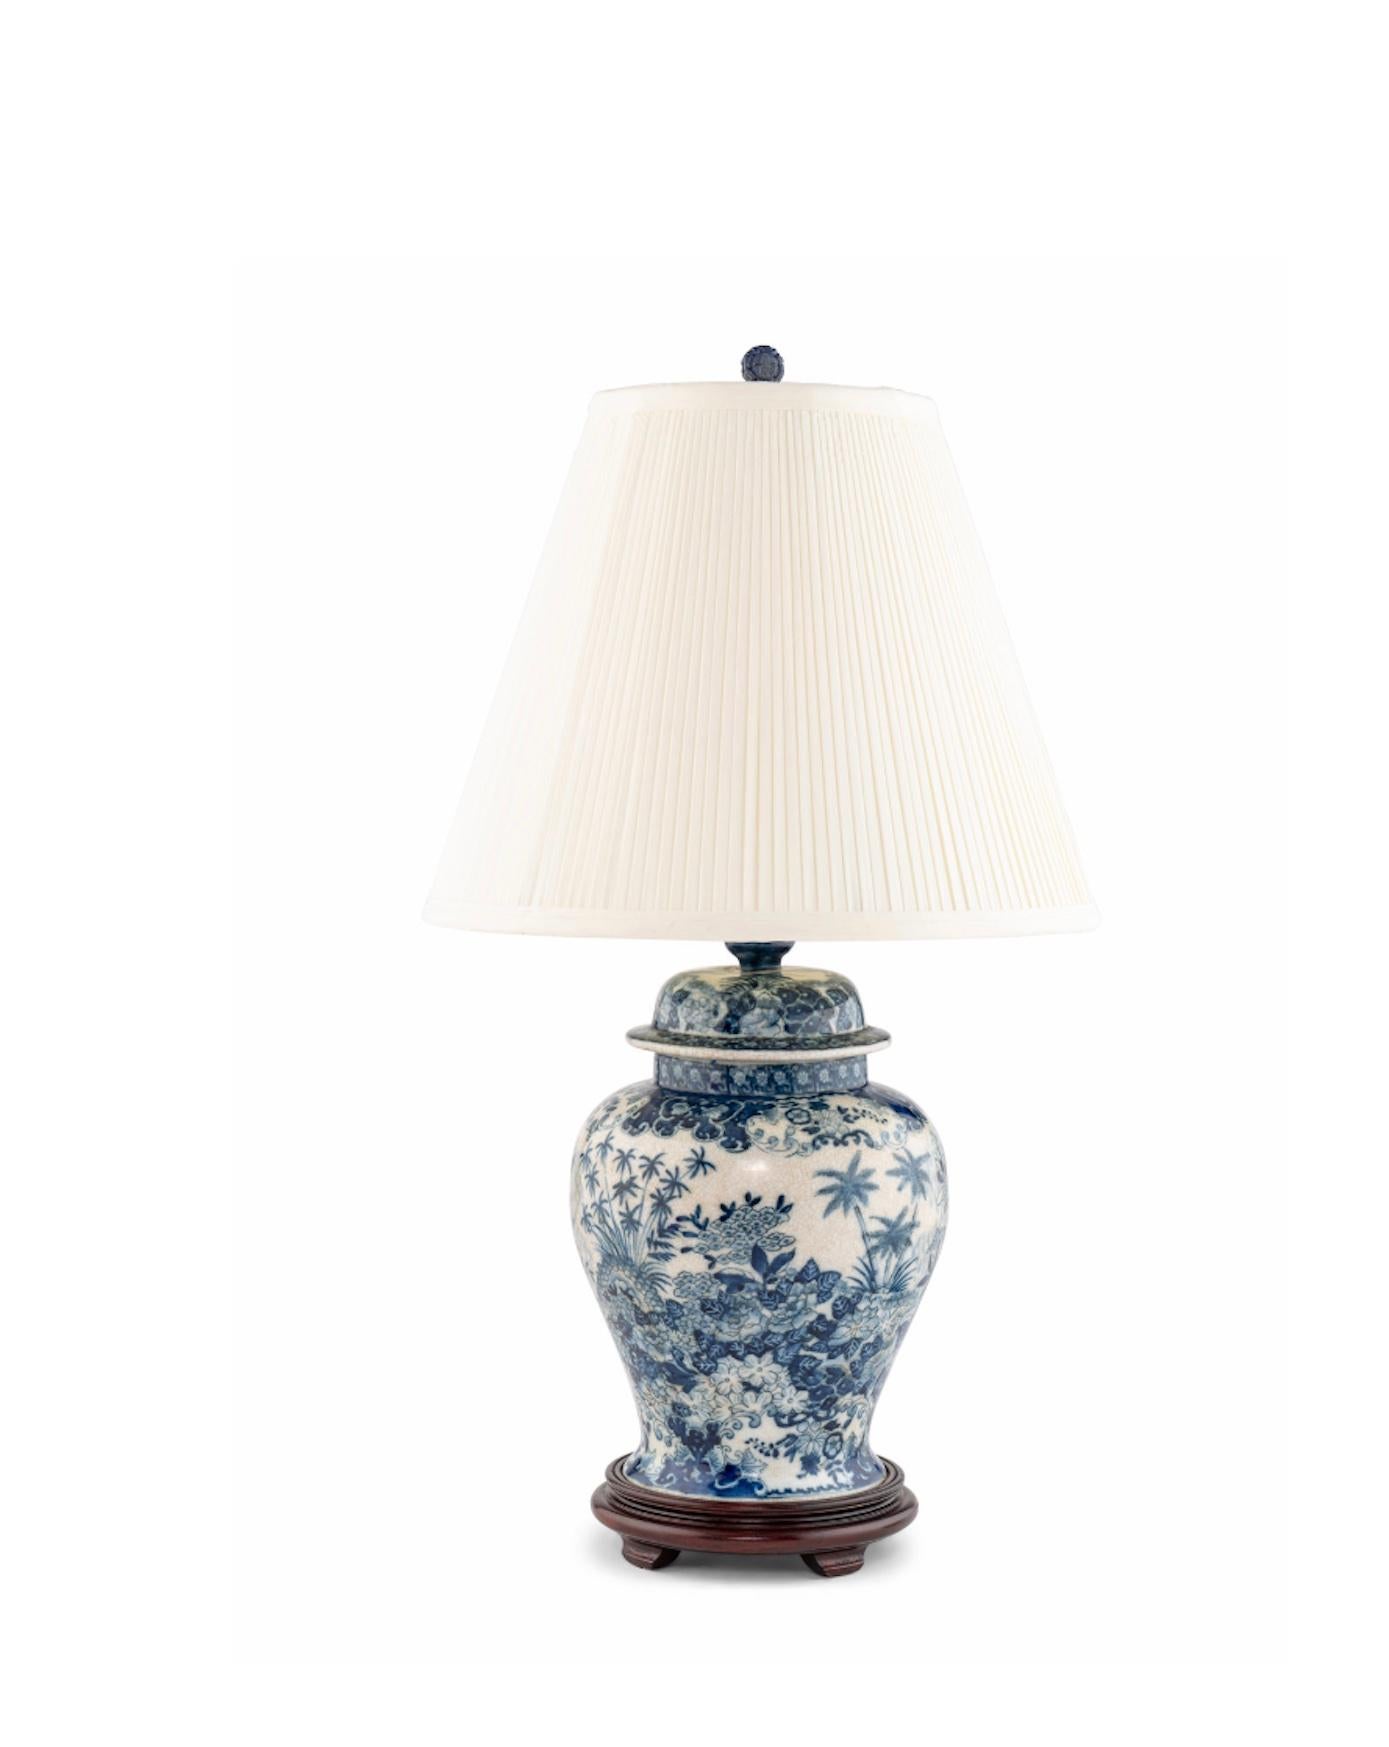 A Blue and White Porcelain Lamp 20th Century Height 25 1/2 inches. In Excellent Condition For Sale In Buchanan, MI